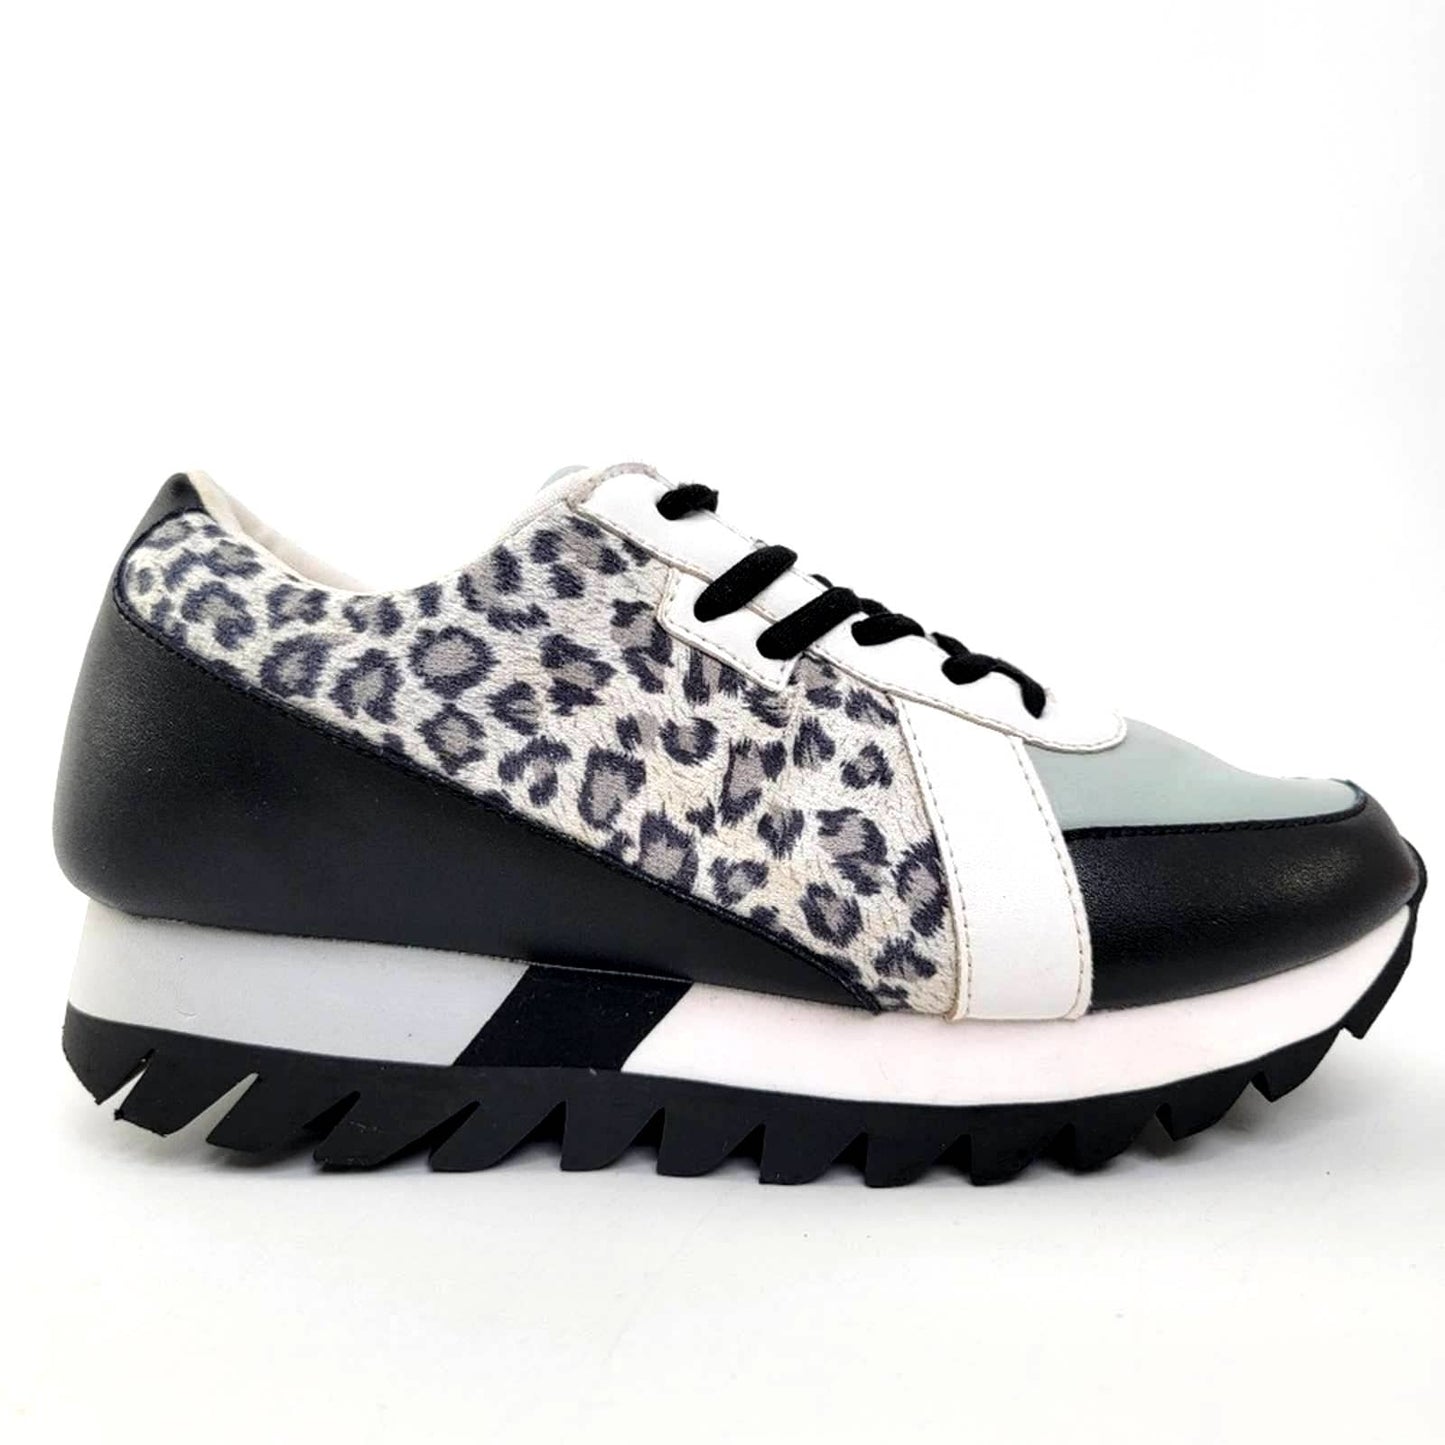 Not Rated Chunky Platform Sneakers - Leopard Cheetah Print - 9.5